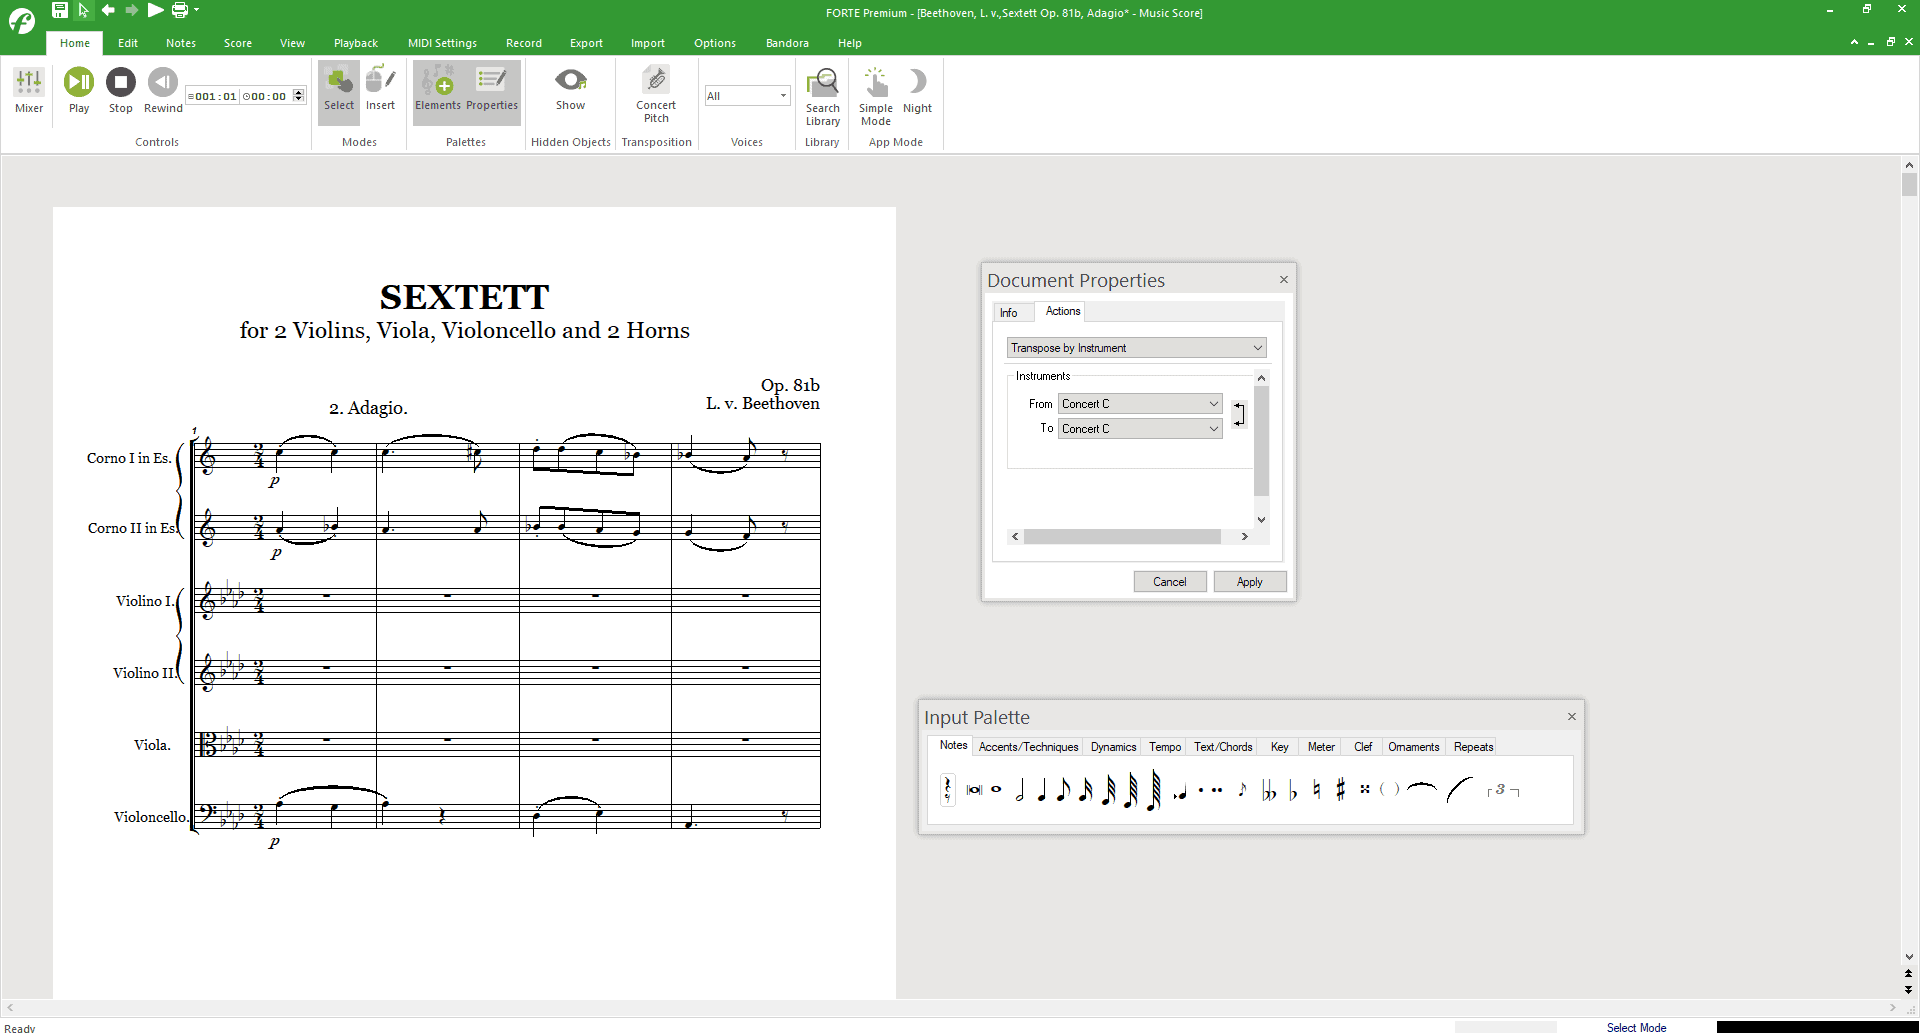 FORTE's input palette makes it easy to add notes to a score and make your own sheet music.